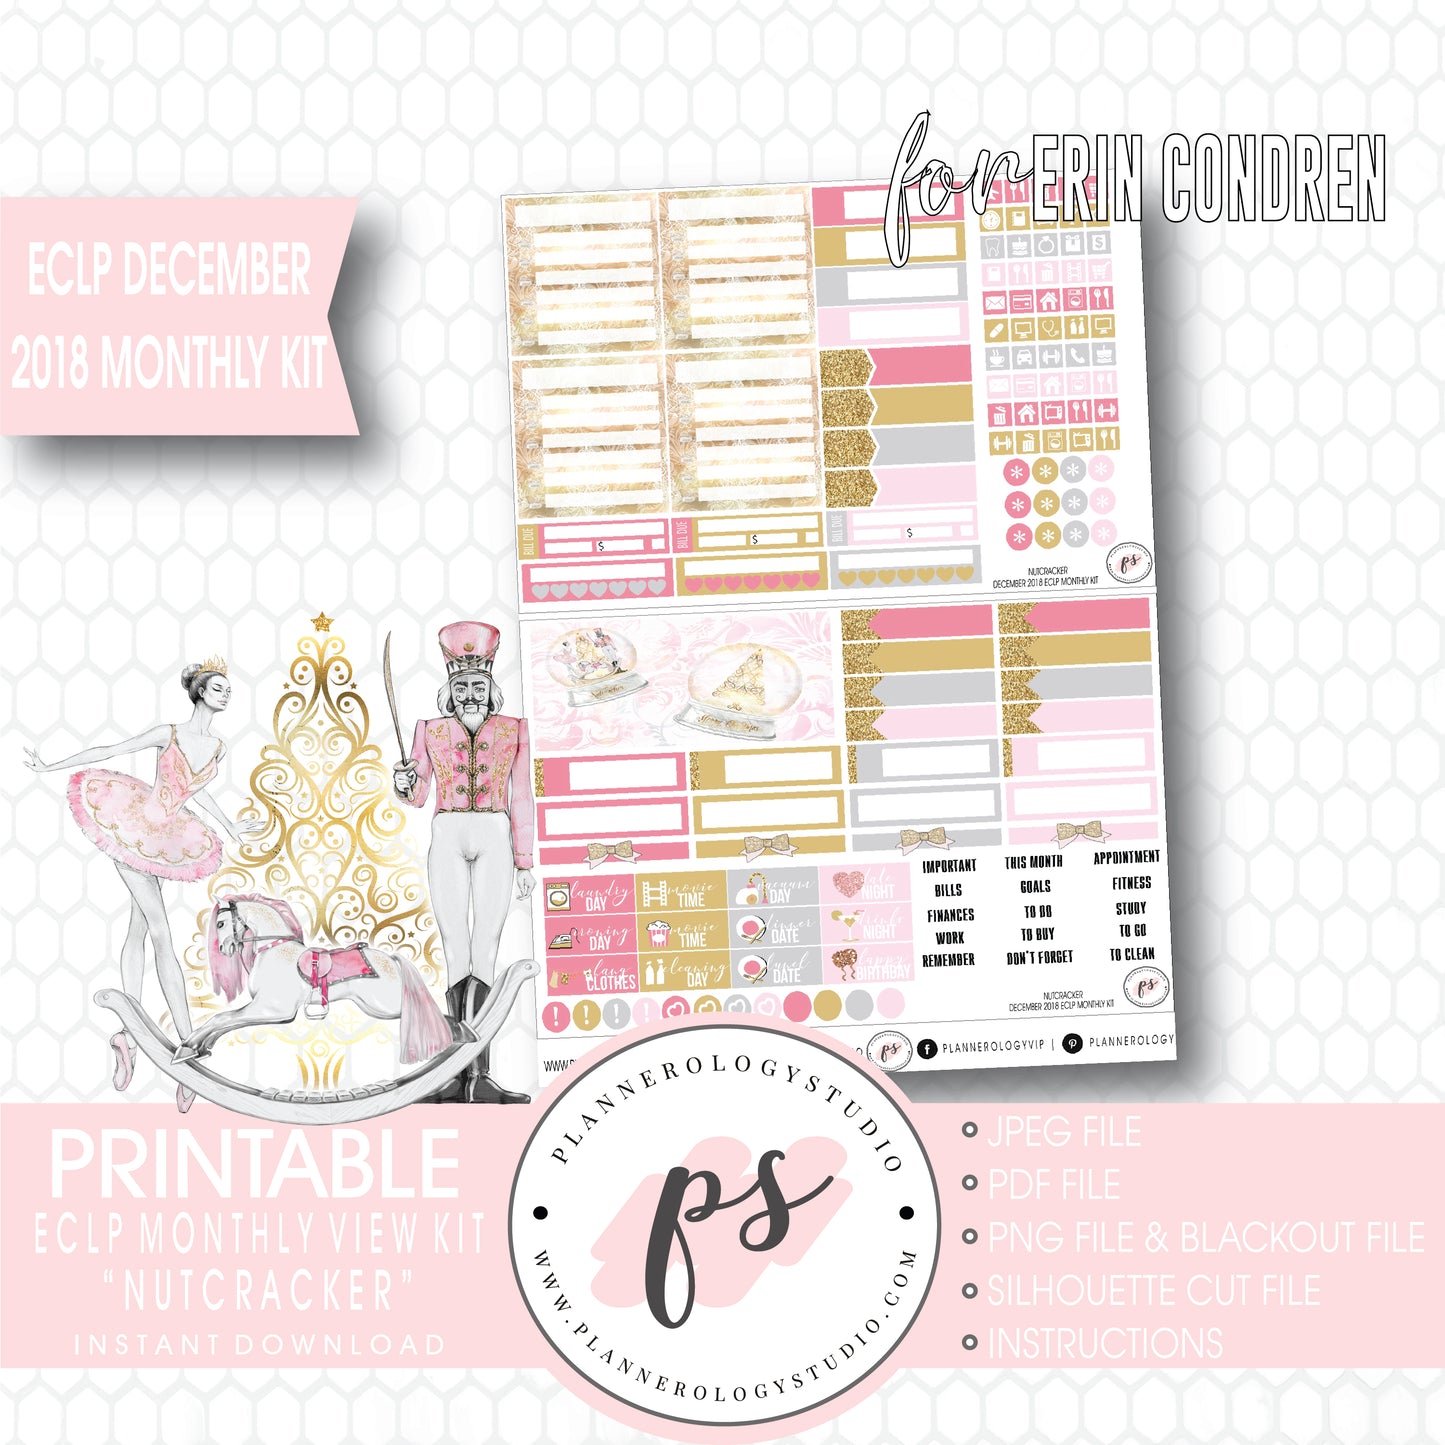 Nutcracker Christmas December 2018 Monthly View Kit Digital Printable Planner Stickers (for use with Erin Condren) - Plannerologystudio